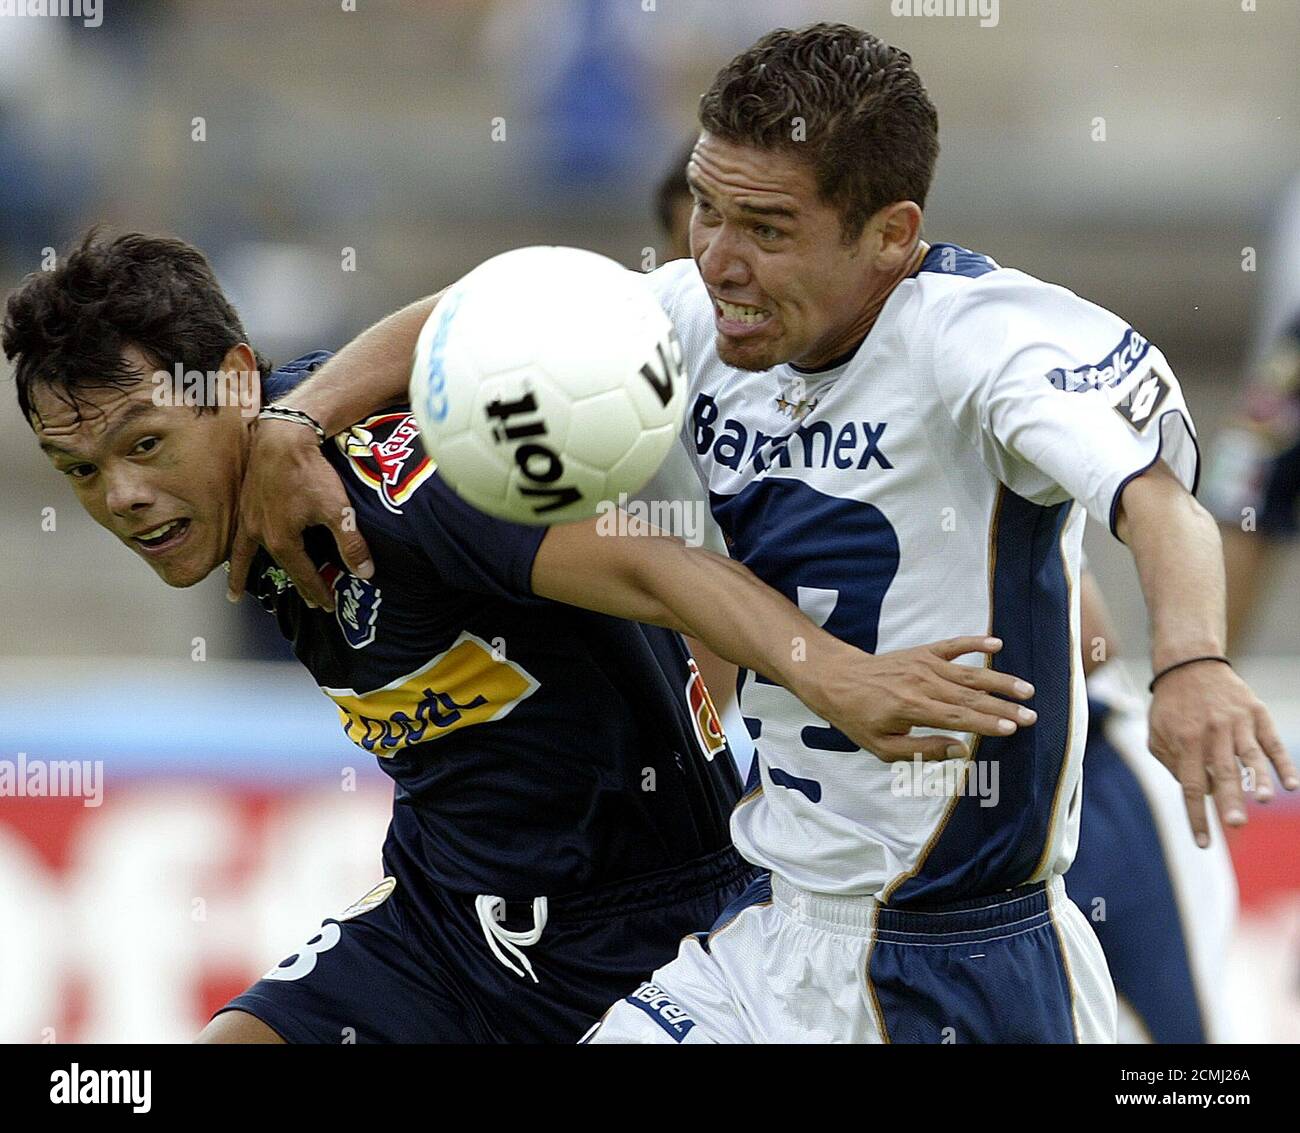 Pumas midfielder Gerardo Galindo (R) battles for the ball with Dorados  defender Joel Sanchez during the first half of their Mexican league  championship match, in Mexico City, October 3, 2004. REUTERS/Henry Romero